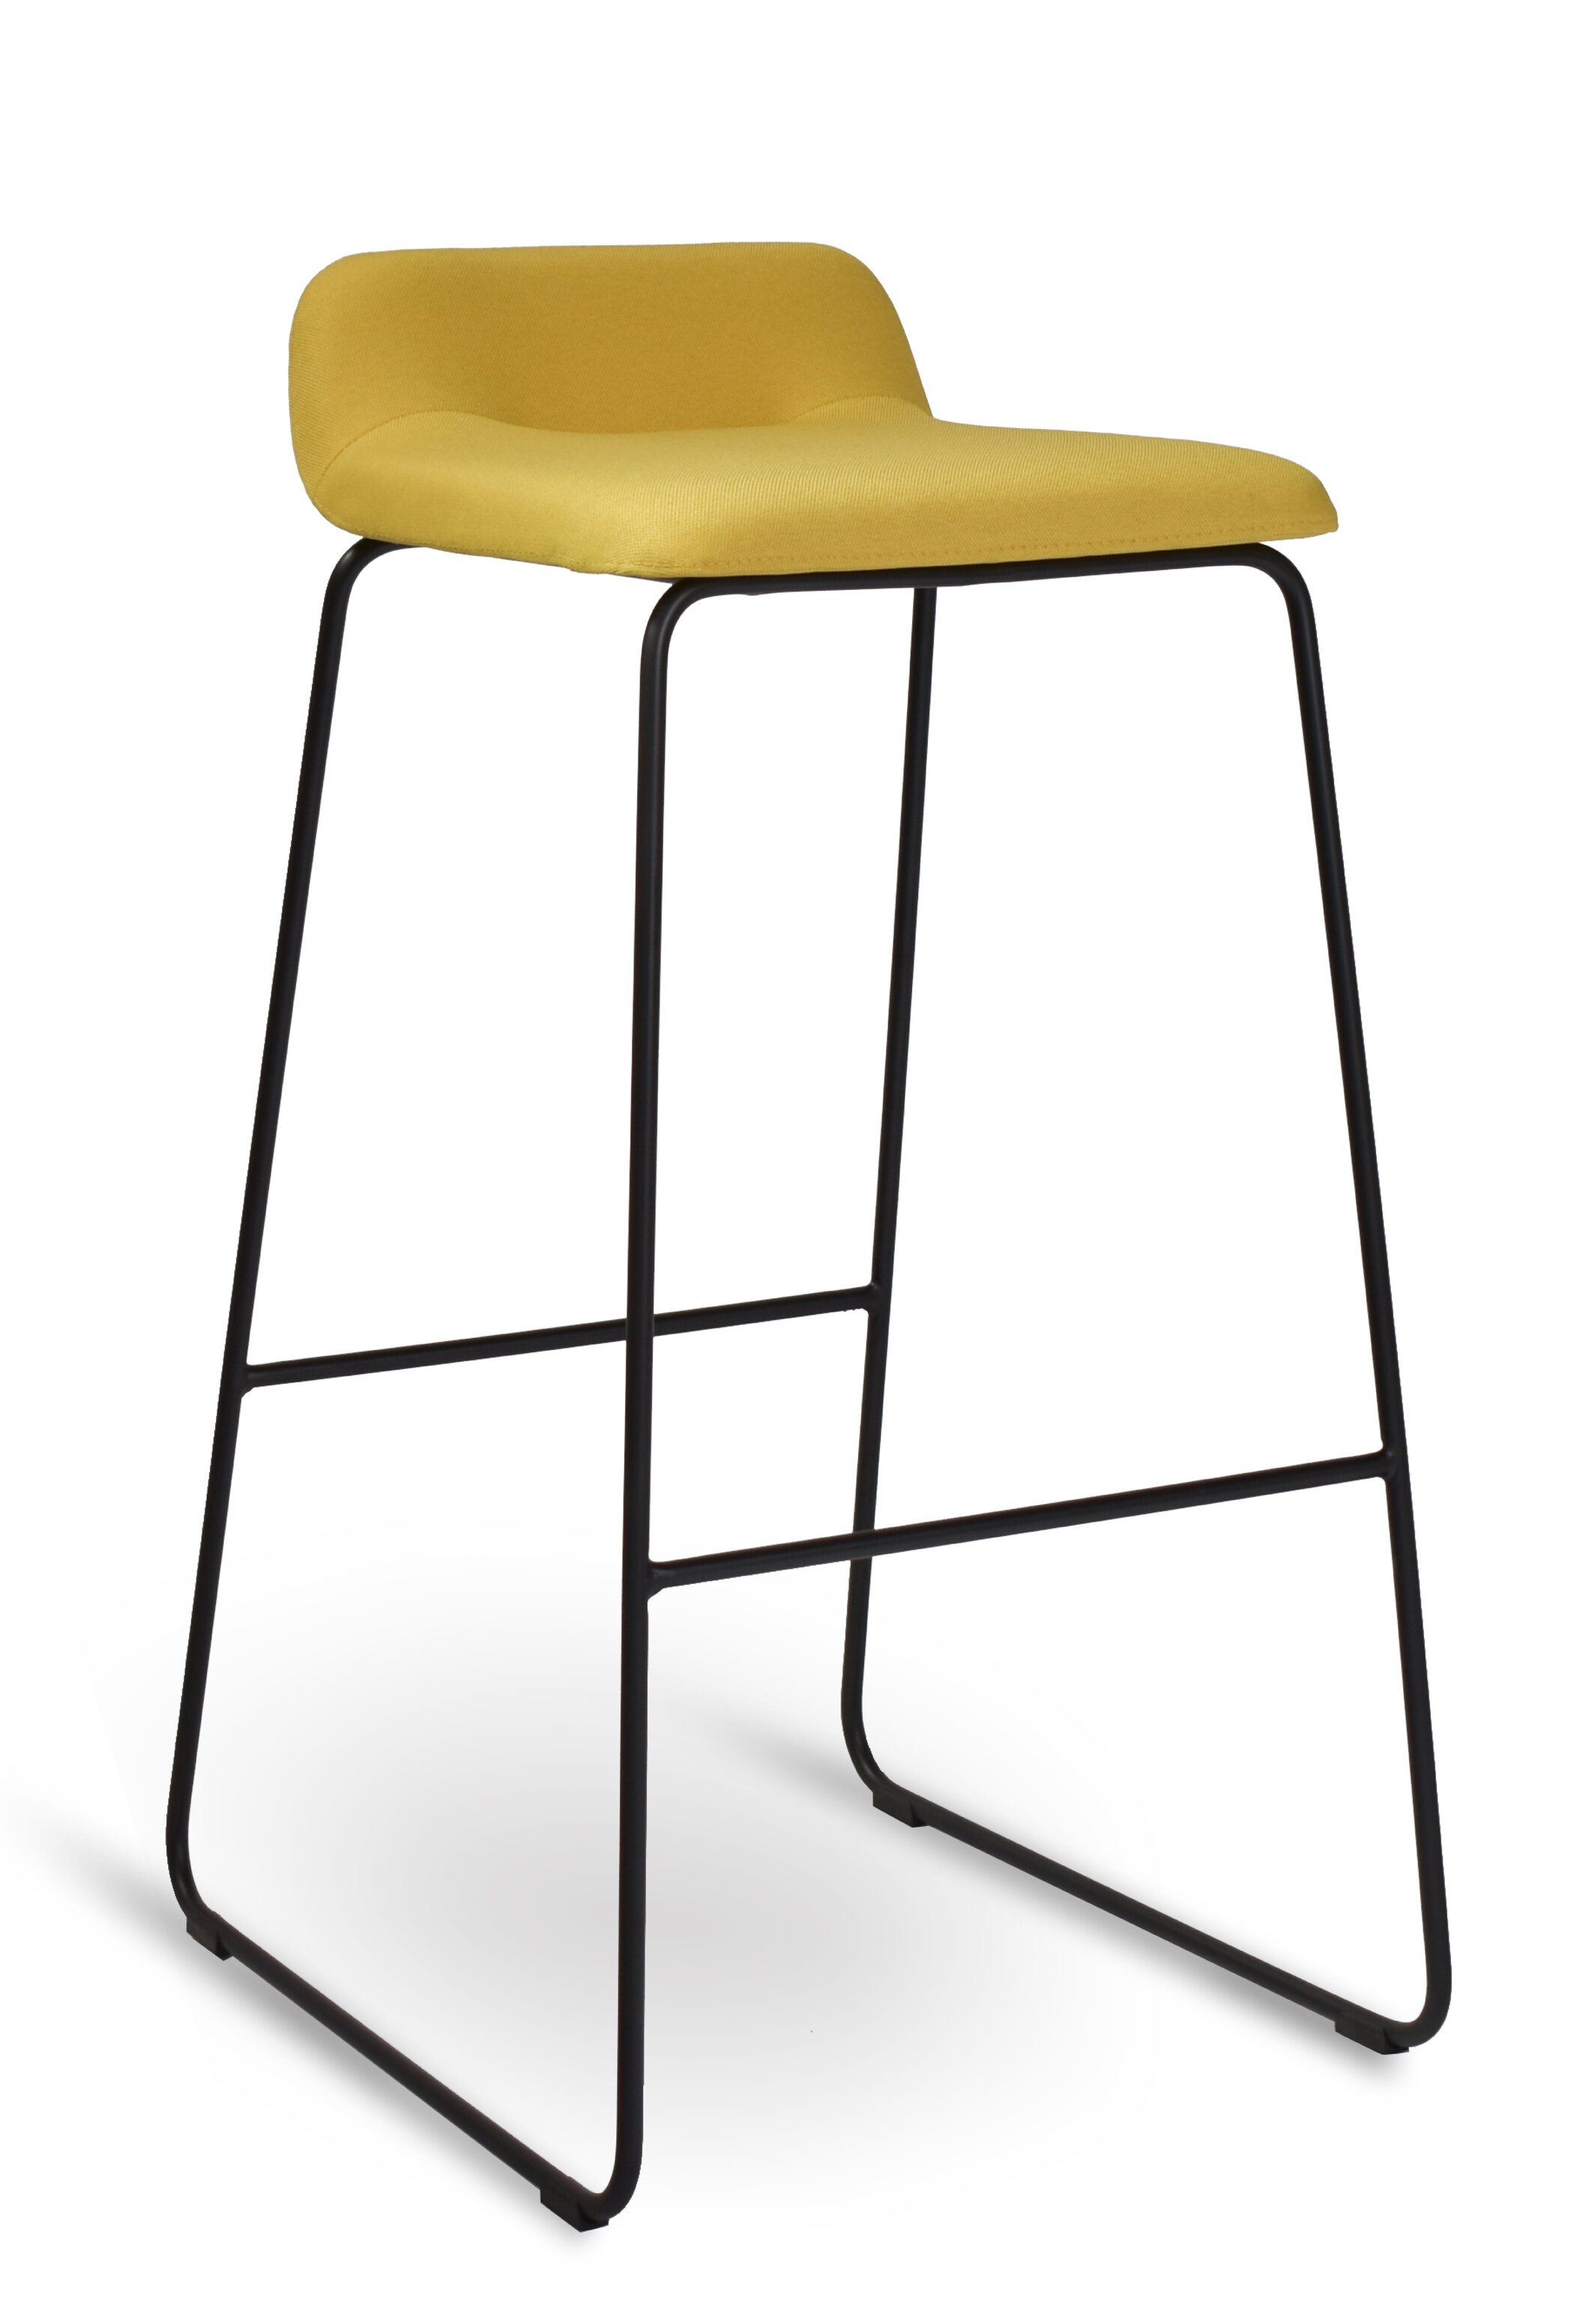 WS - Lolli High Stool - Yellow Upholstered (Front angle)